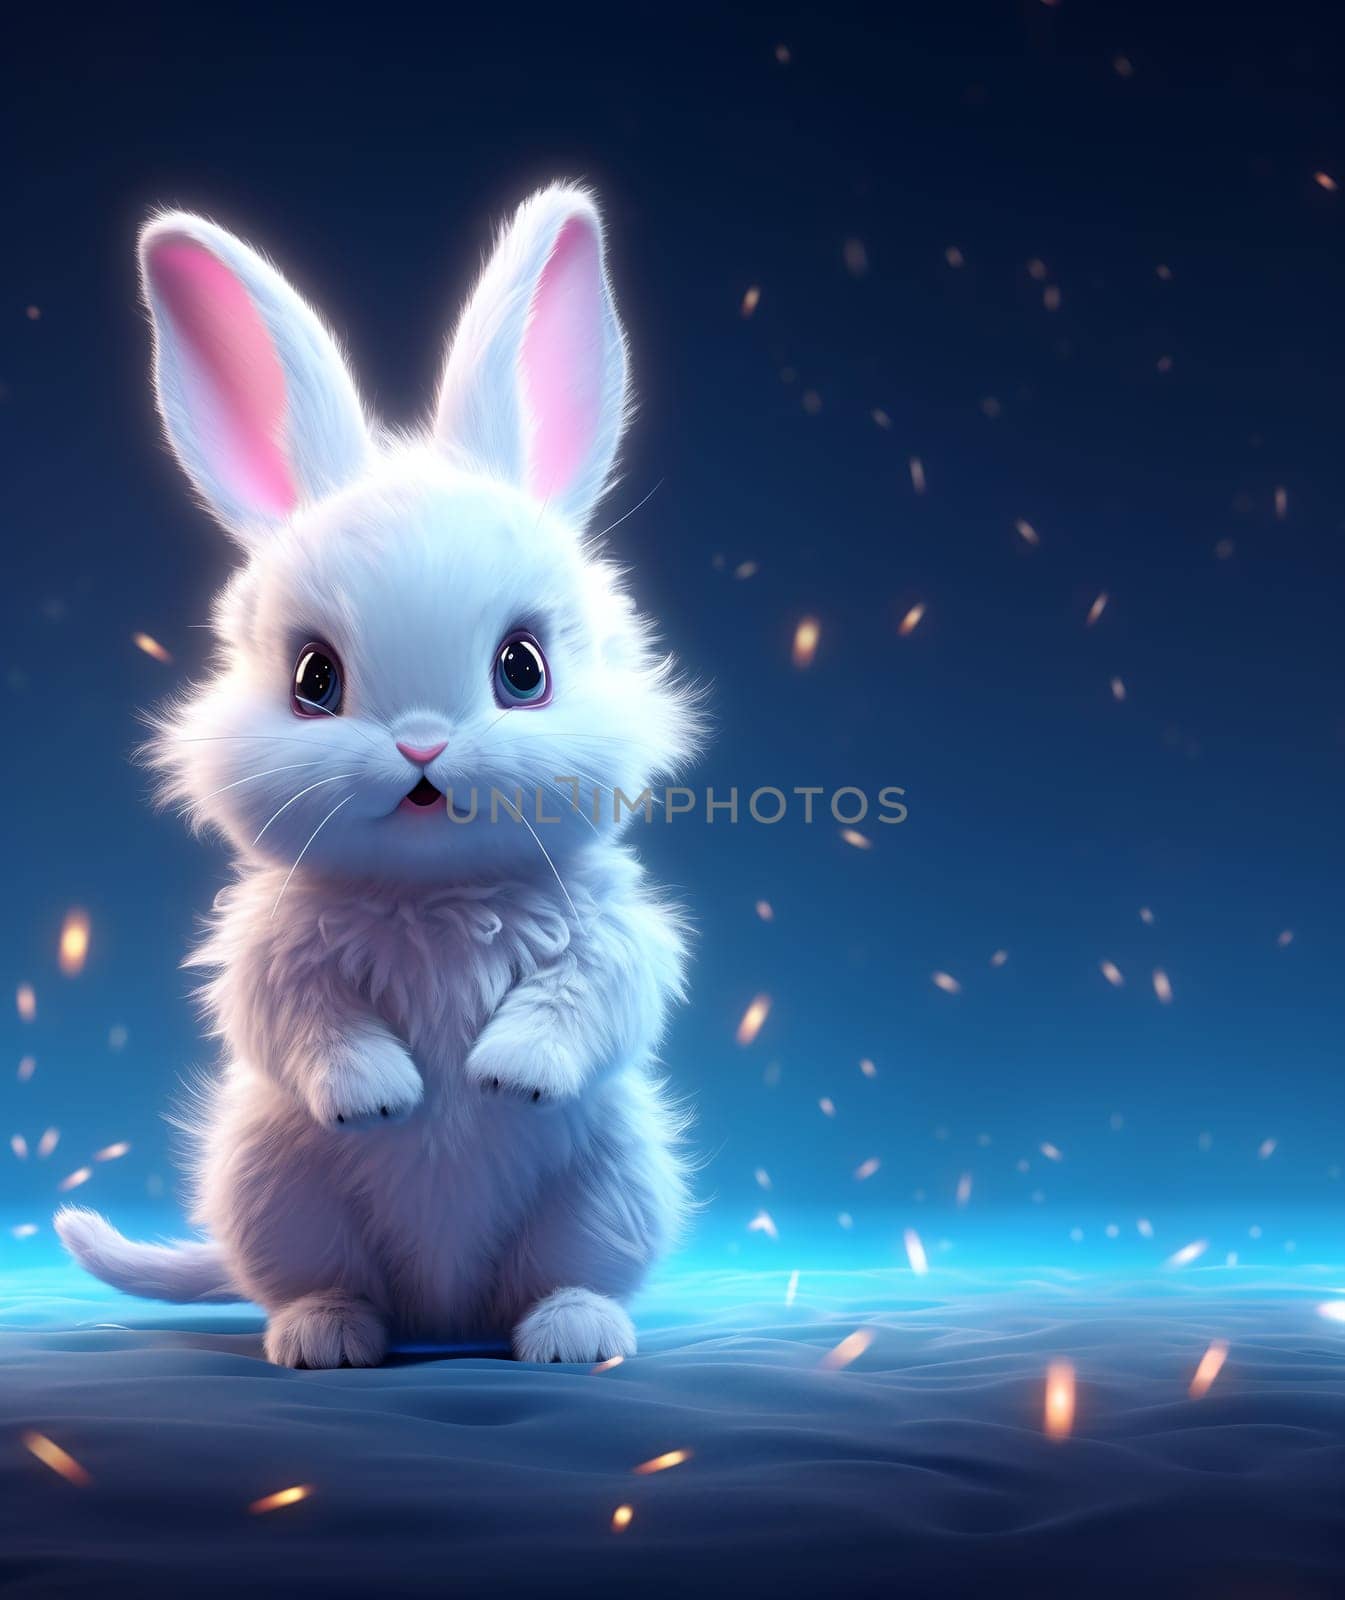 White Rabbit on blue background with glowing lights by chrisroll